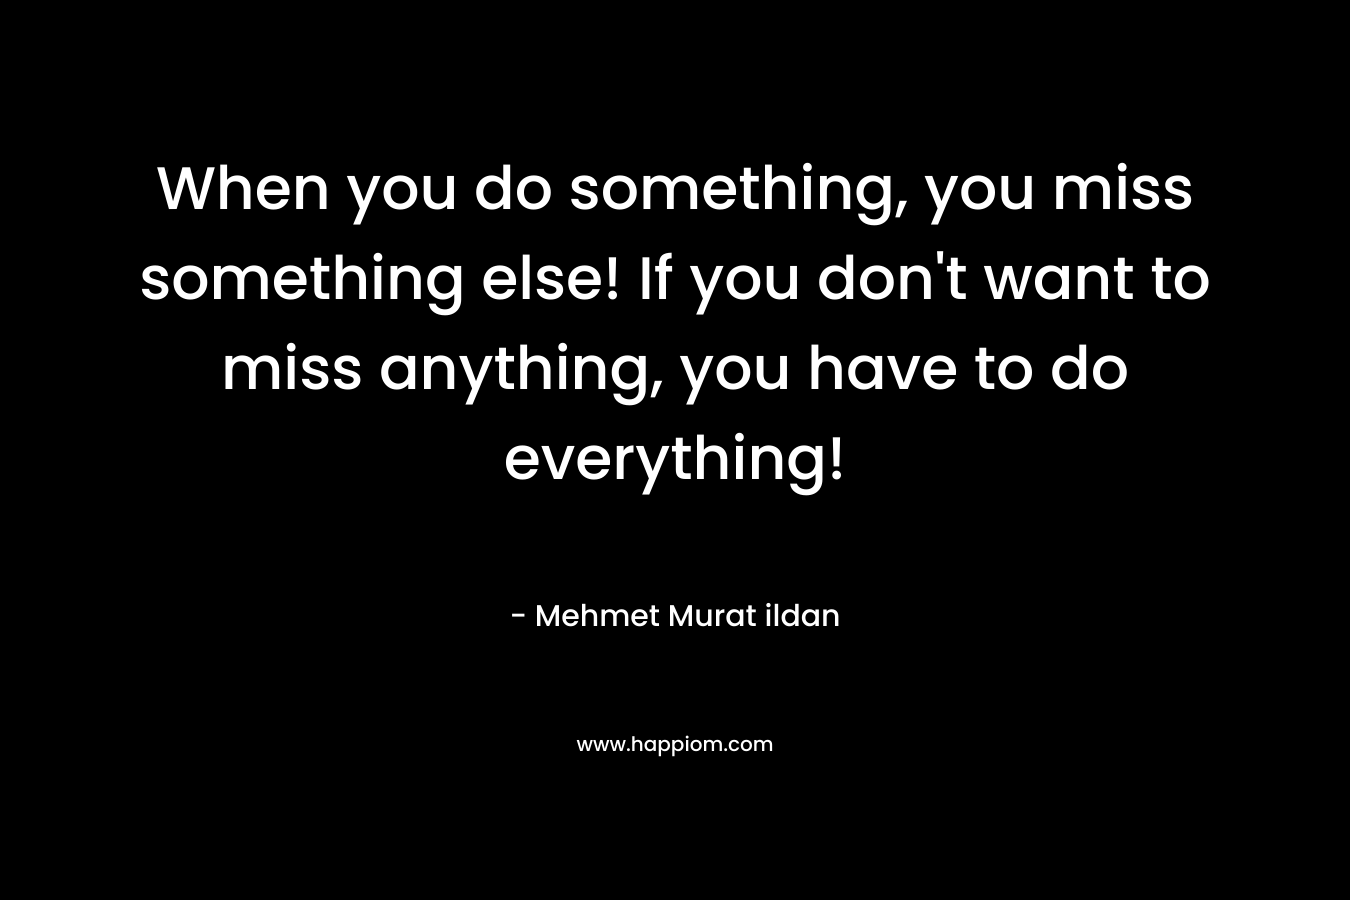 When you do something, you miss something else! If you don't want to miss anything, you have to do everything!